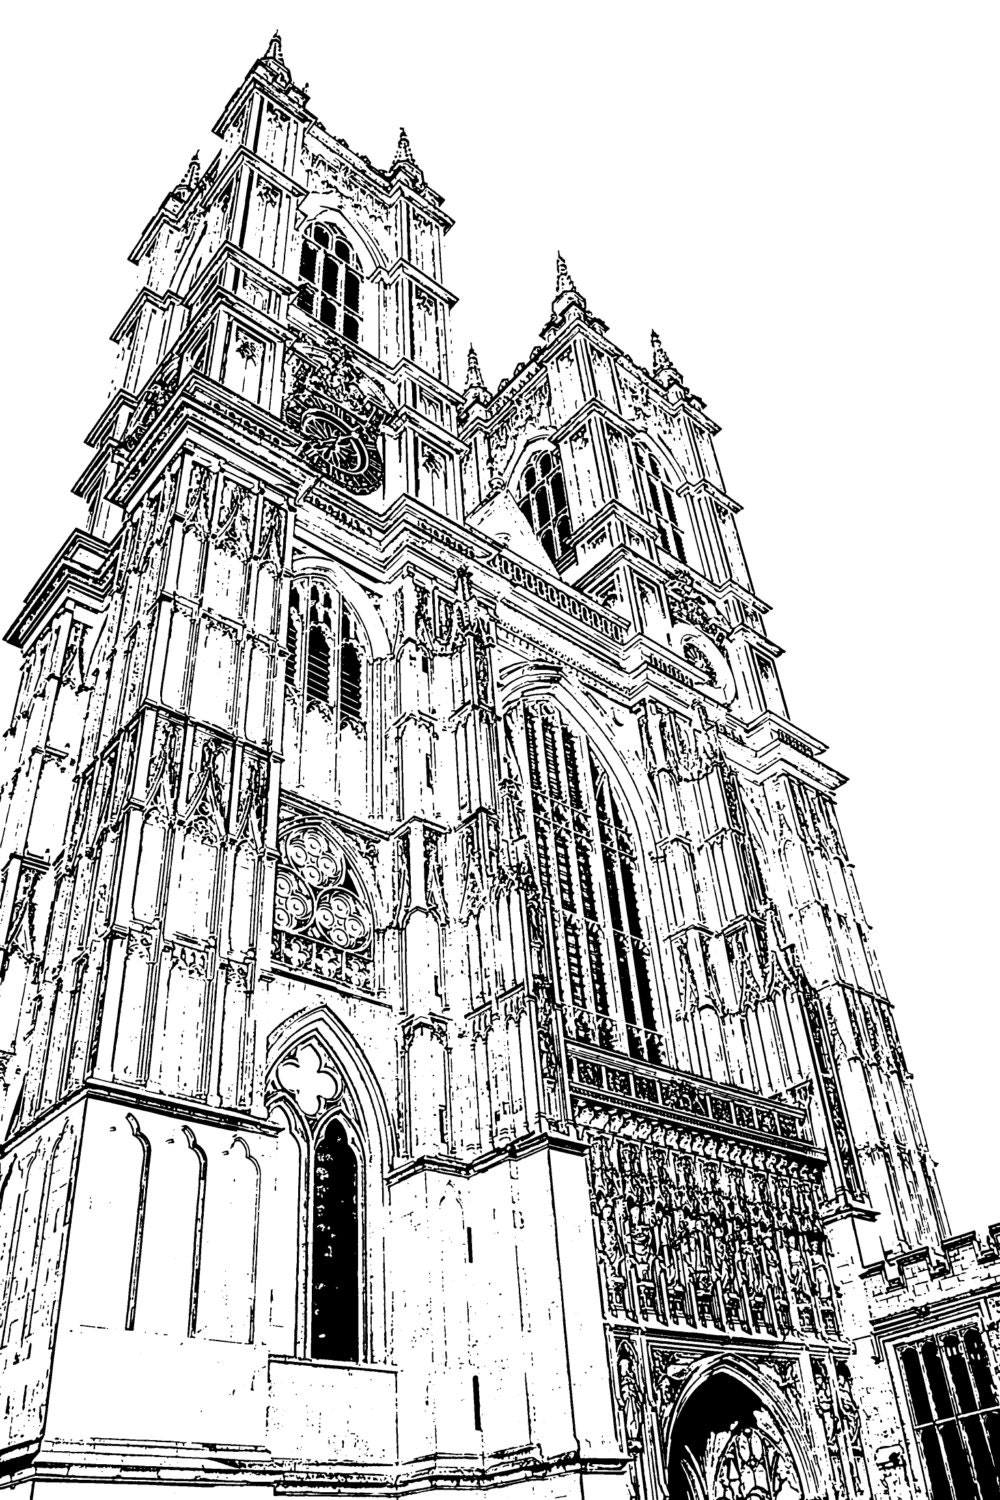 Download London England Adult Coloring Book/ Set of 5 Coloring Pages/